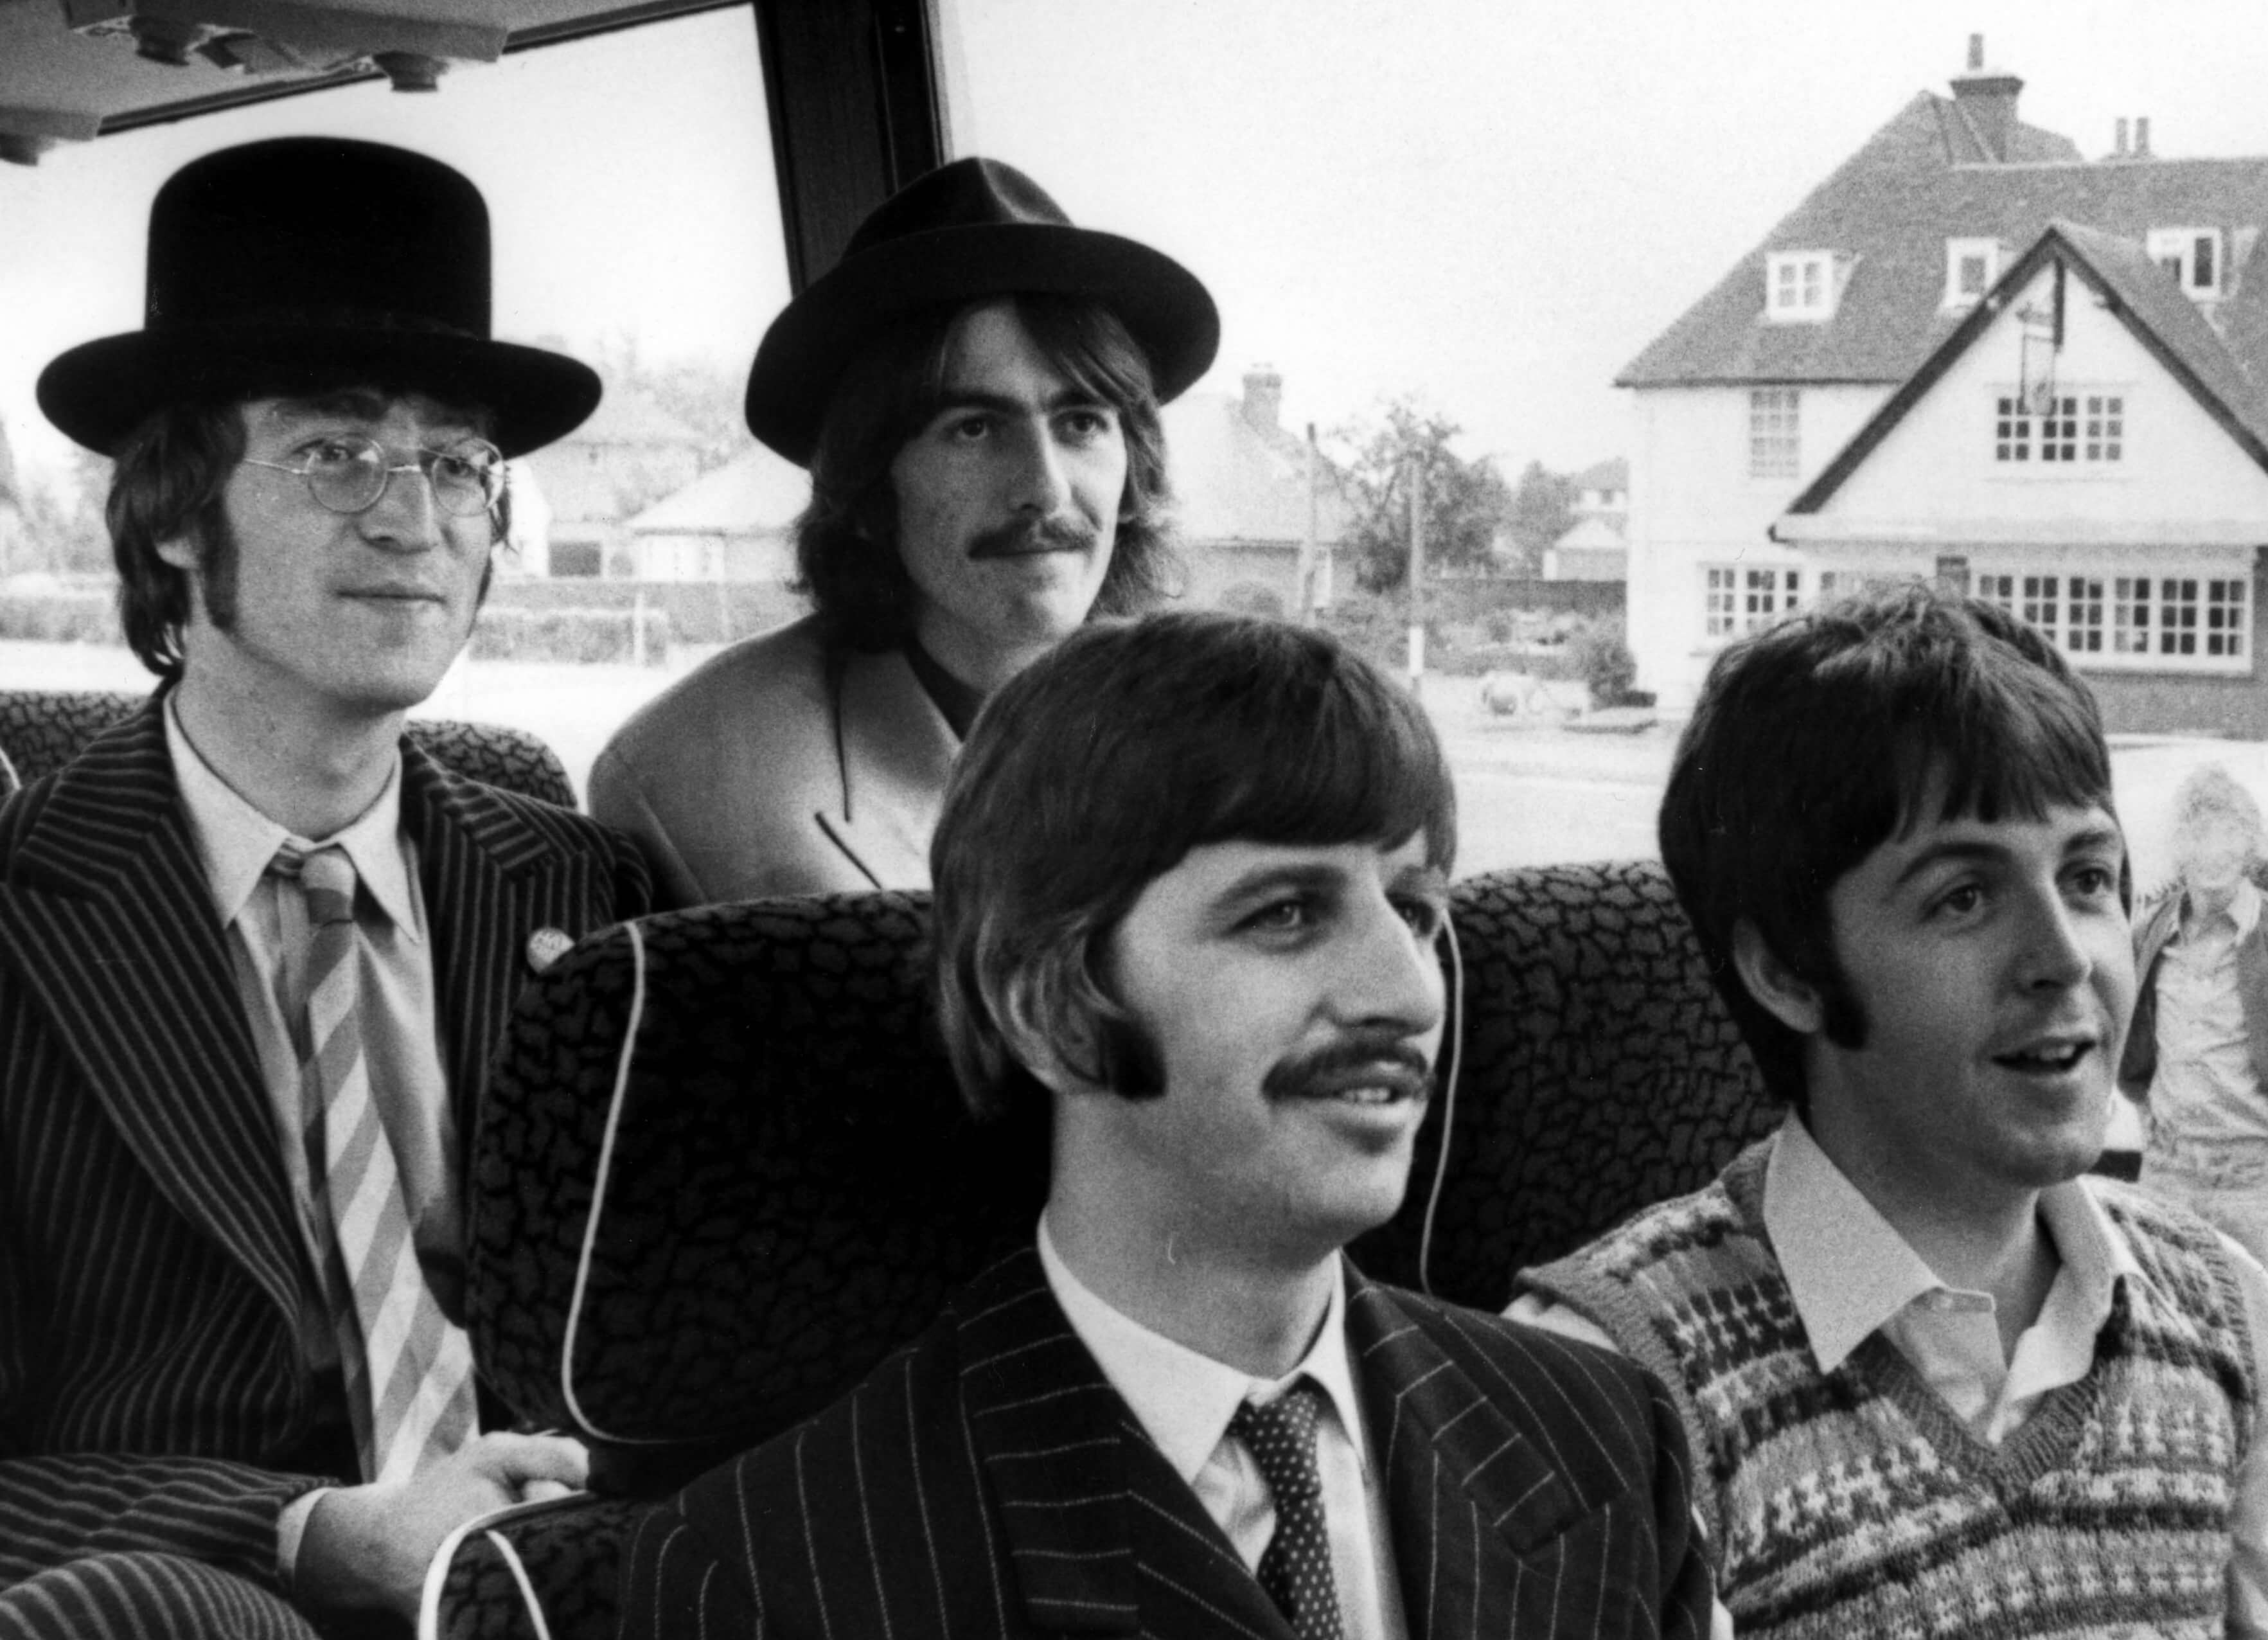 The stars of The Beatles' 'Magical Mystery Tour' in black-and-white